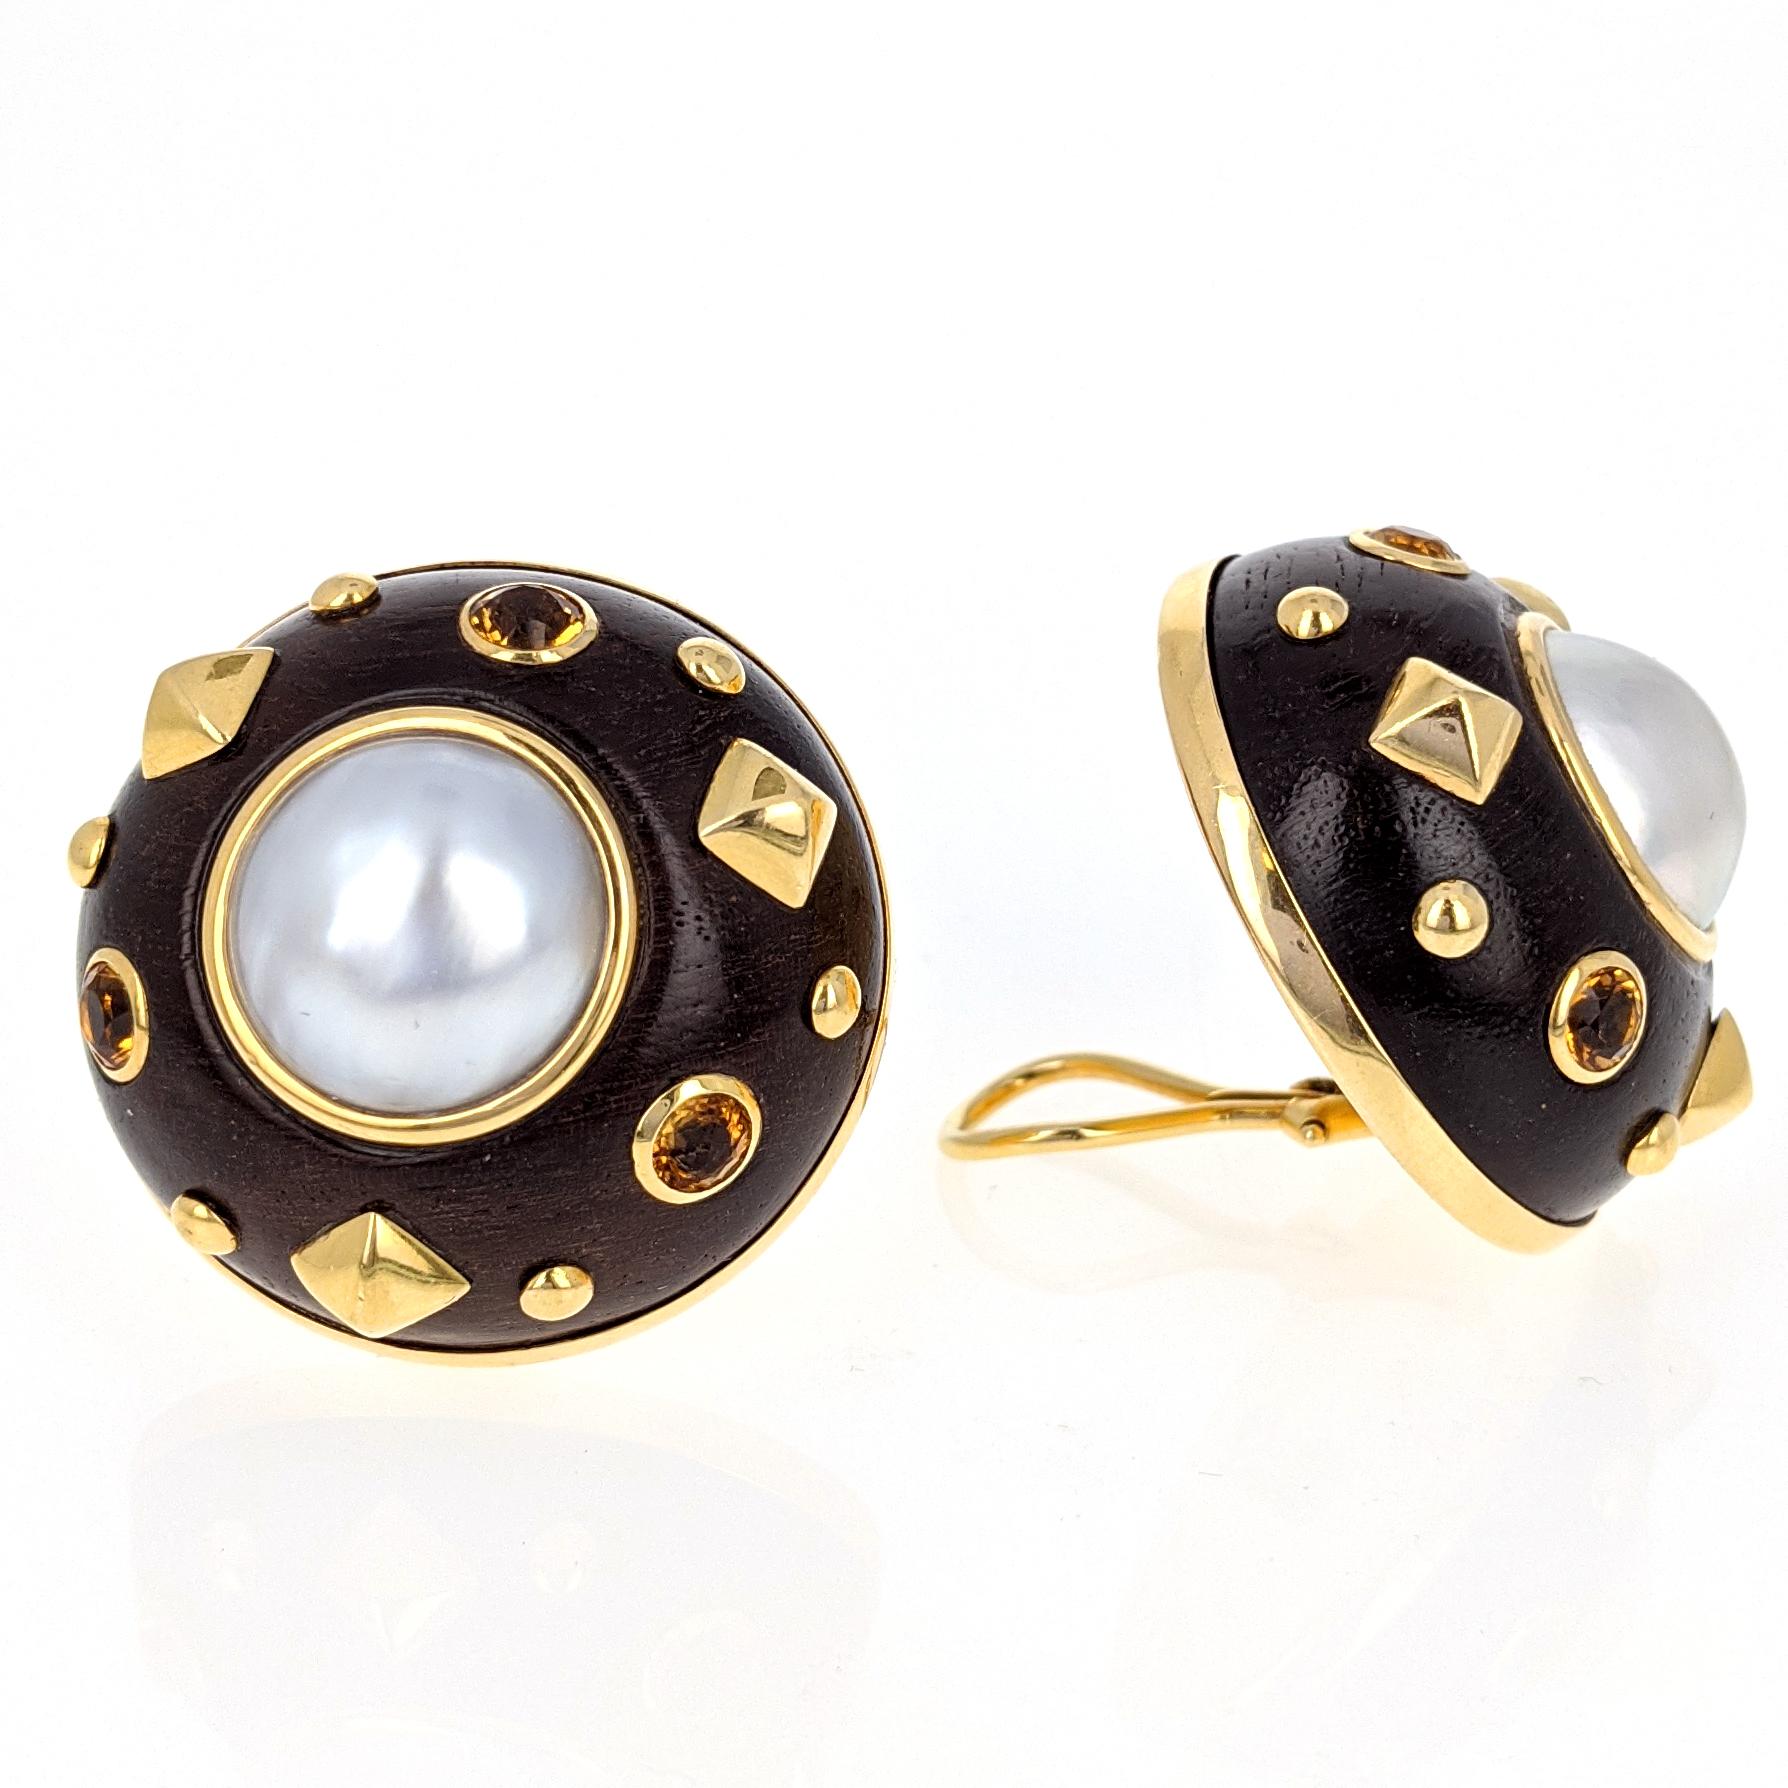 This pair of clip earrings by Trianon centers upon bezel set mabe pearls. Each is set within a bombe wood frame with round-cut citrines and round and pyramidal 18 karat yellow gold accents. They measure 1.25 inches in diameter. They are marked